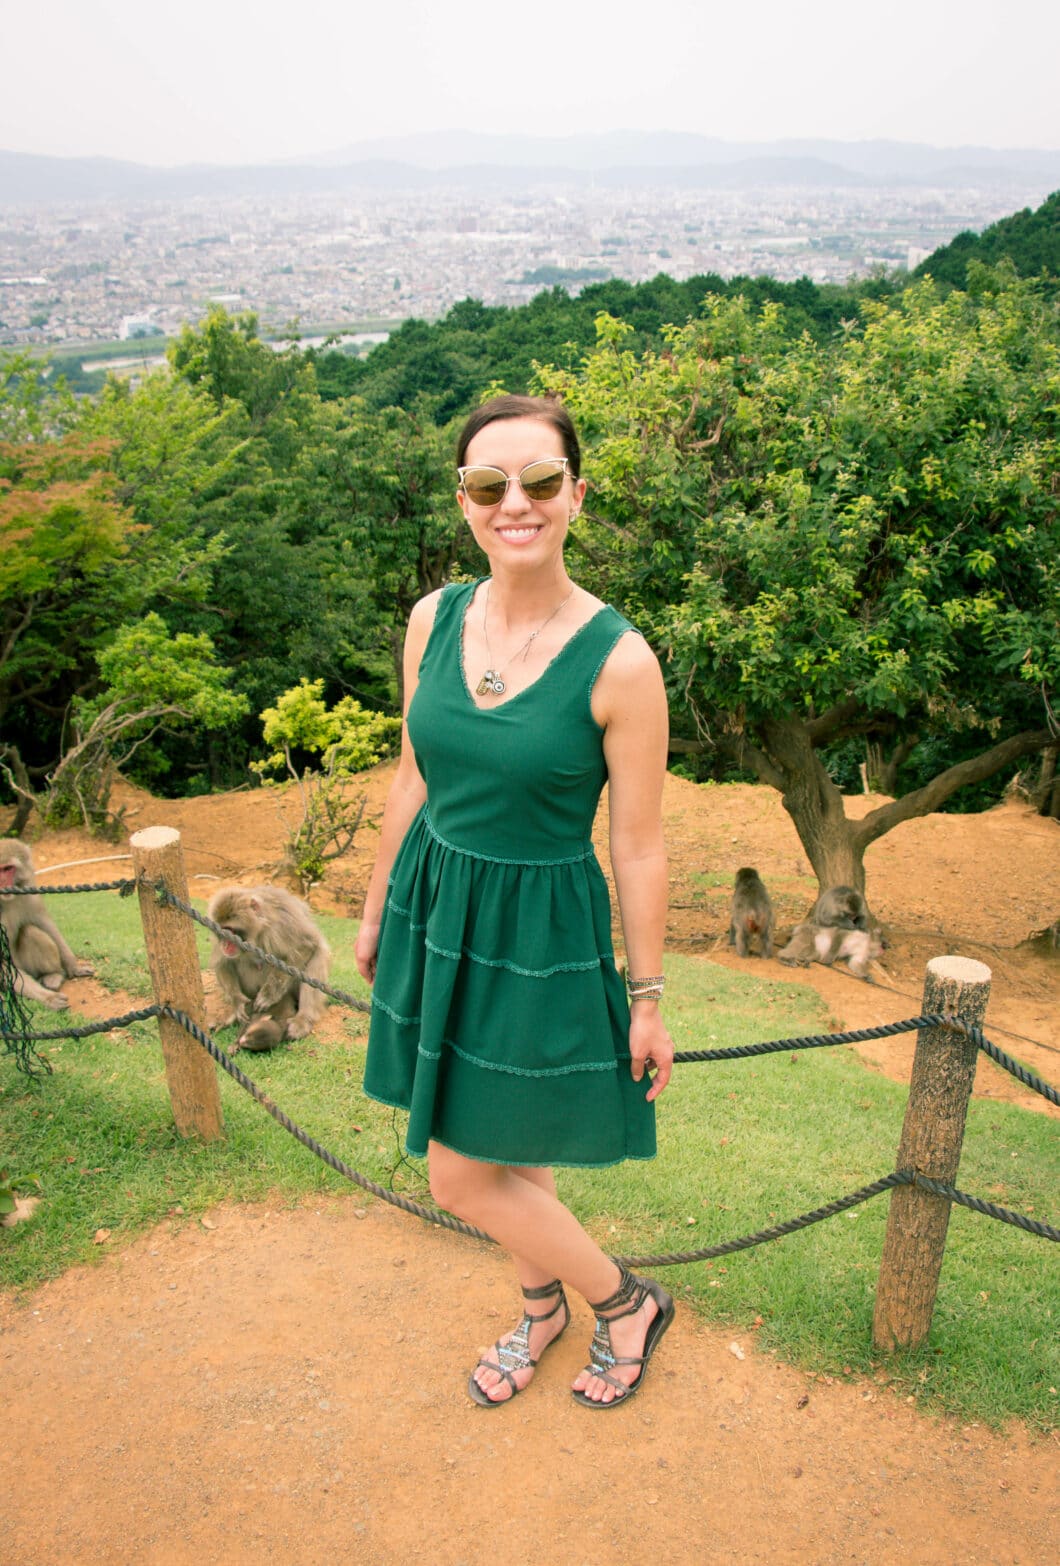 ModCloth Stylish Surprise Dress and Zappos Sandals